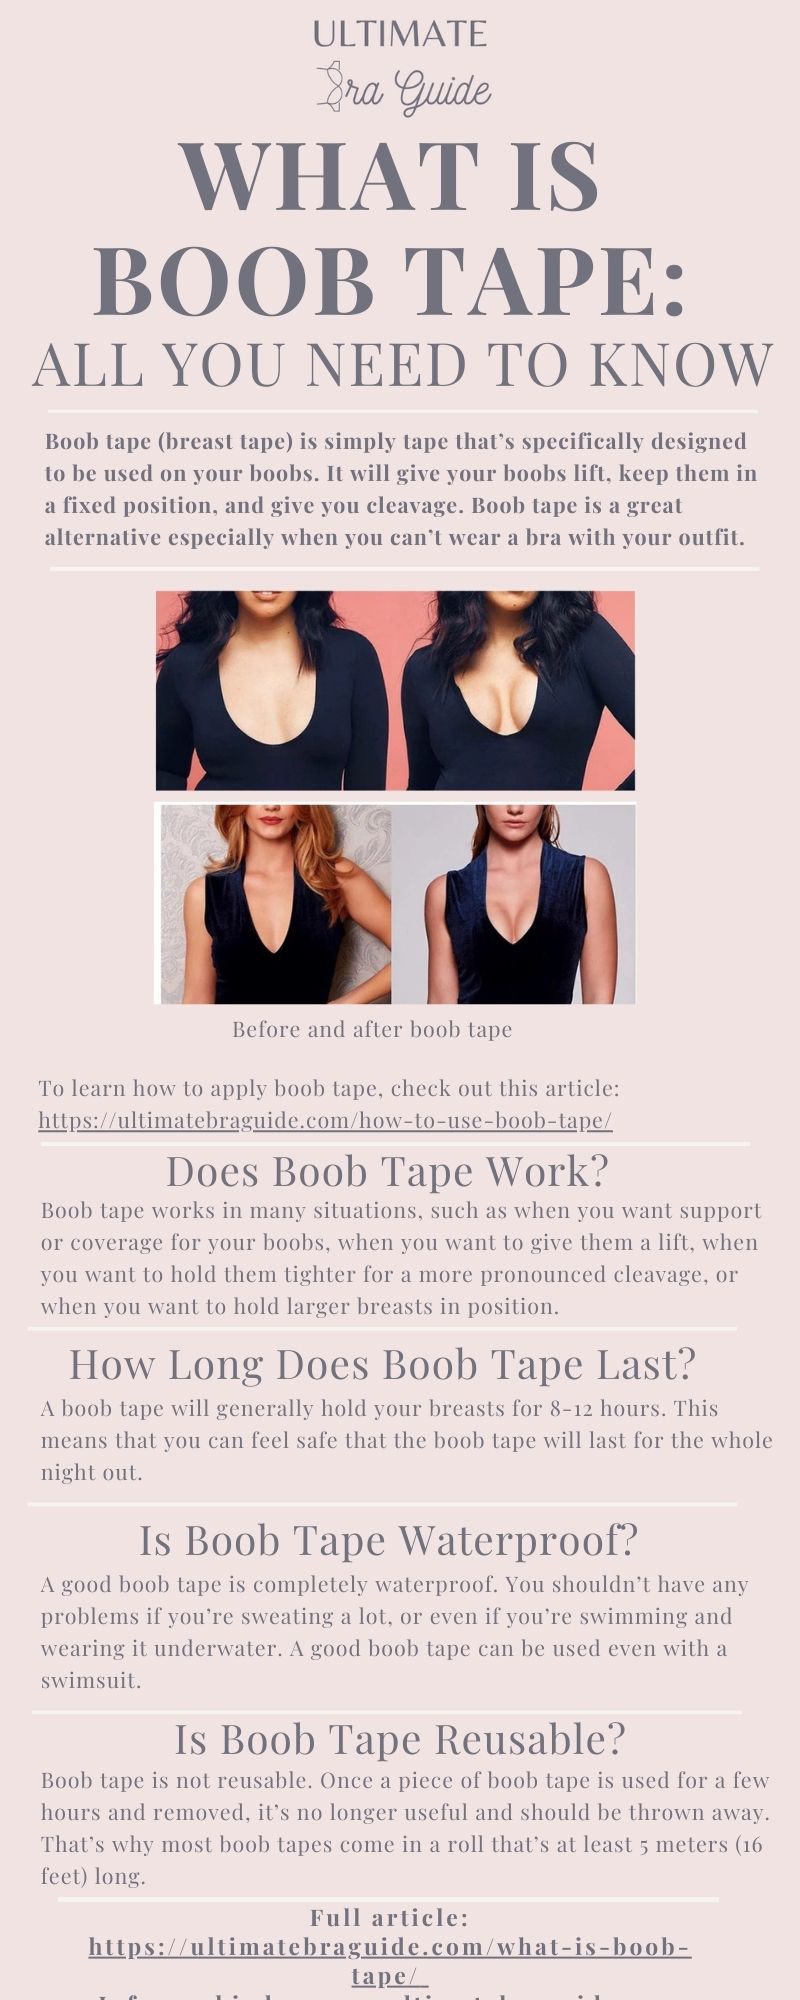 What is boob tape Infographic - This answers questions such as what is boob tape, does boob tape work, is boob tape waterproof, is boob tape reusable, and so on